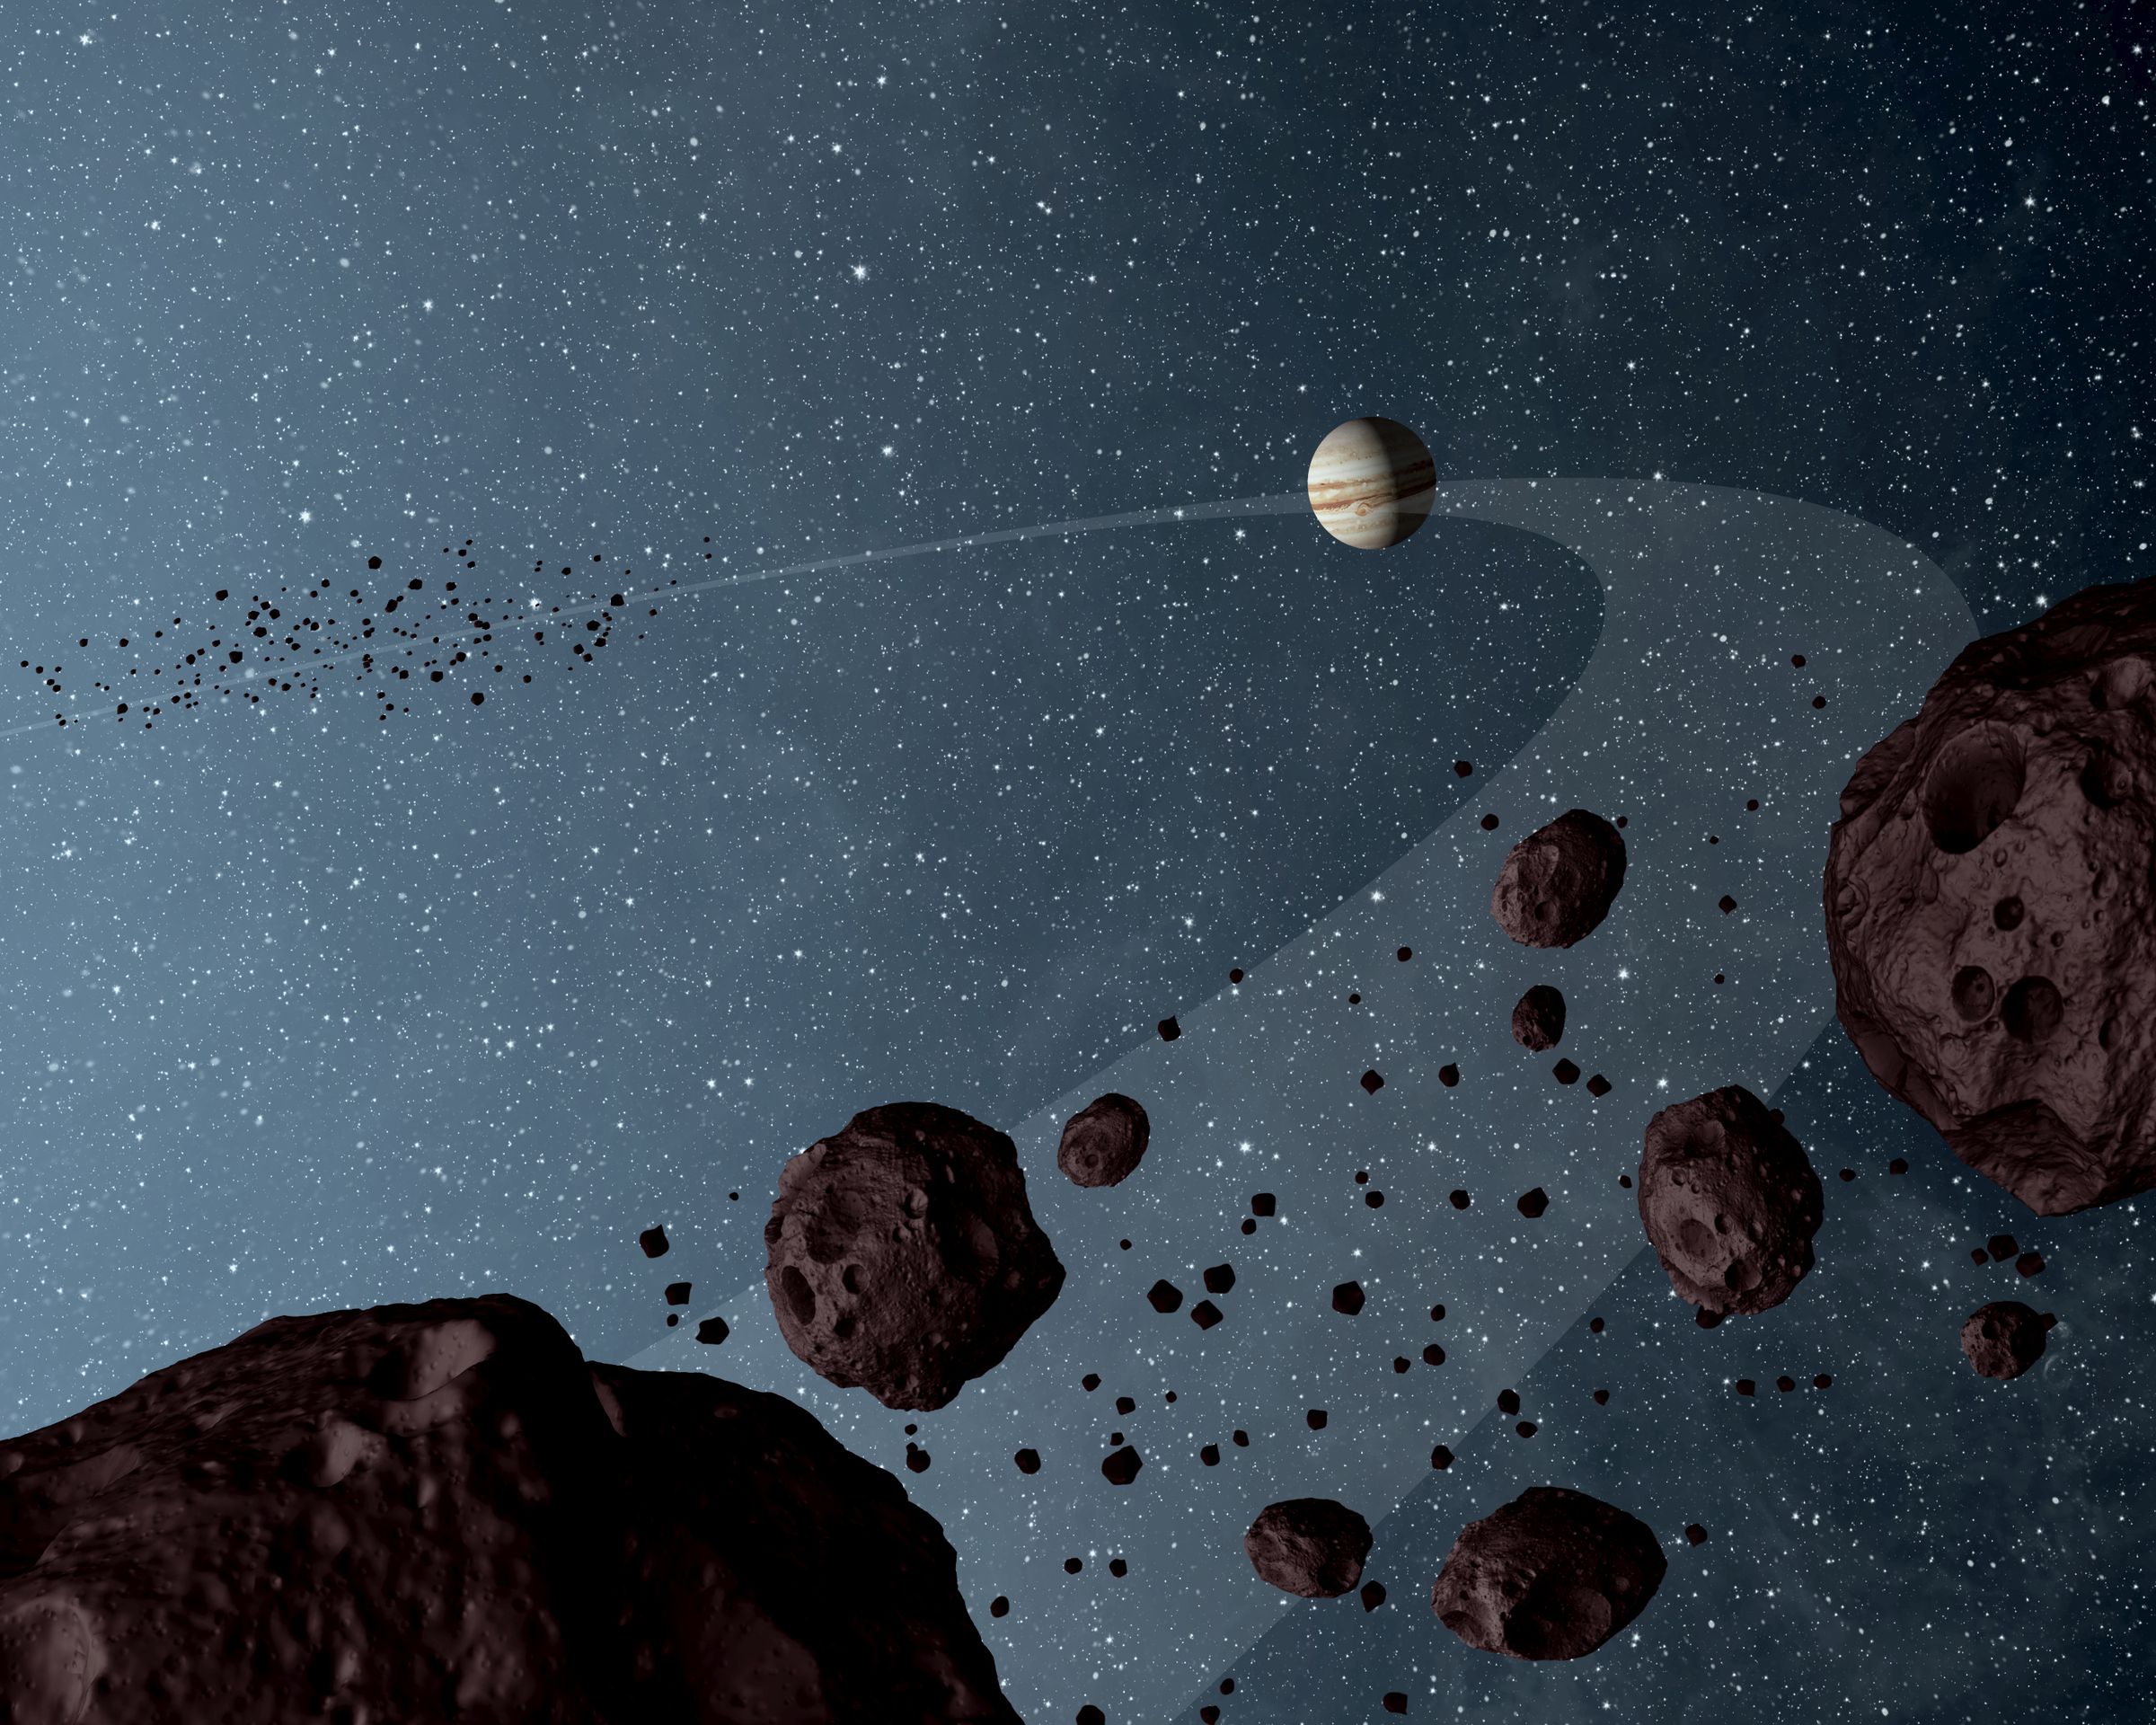 An artistic rendering of the Trojan asteroid swarms, with one clump ahead of Jupiter and another clump trailing Jupiter.